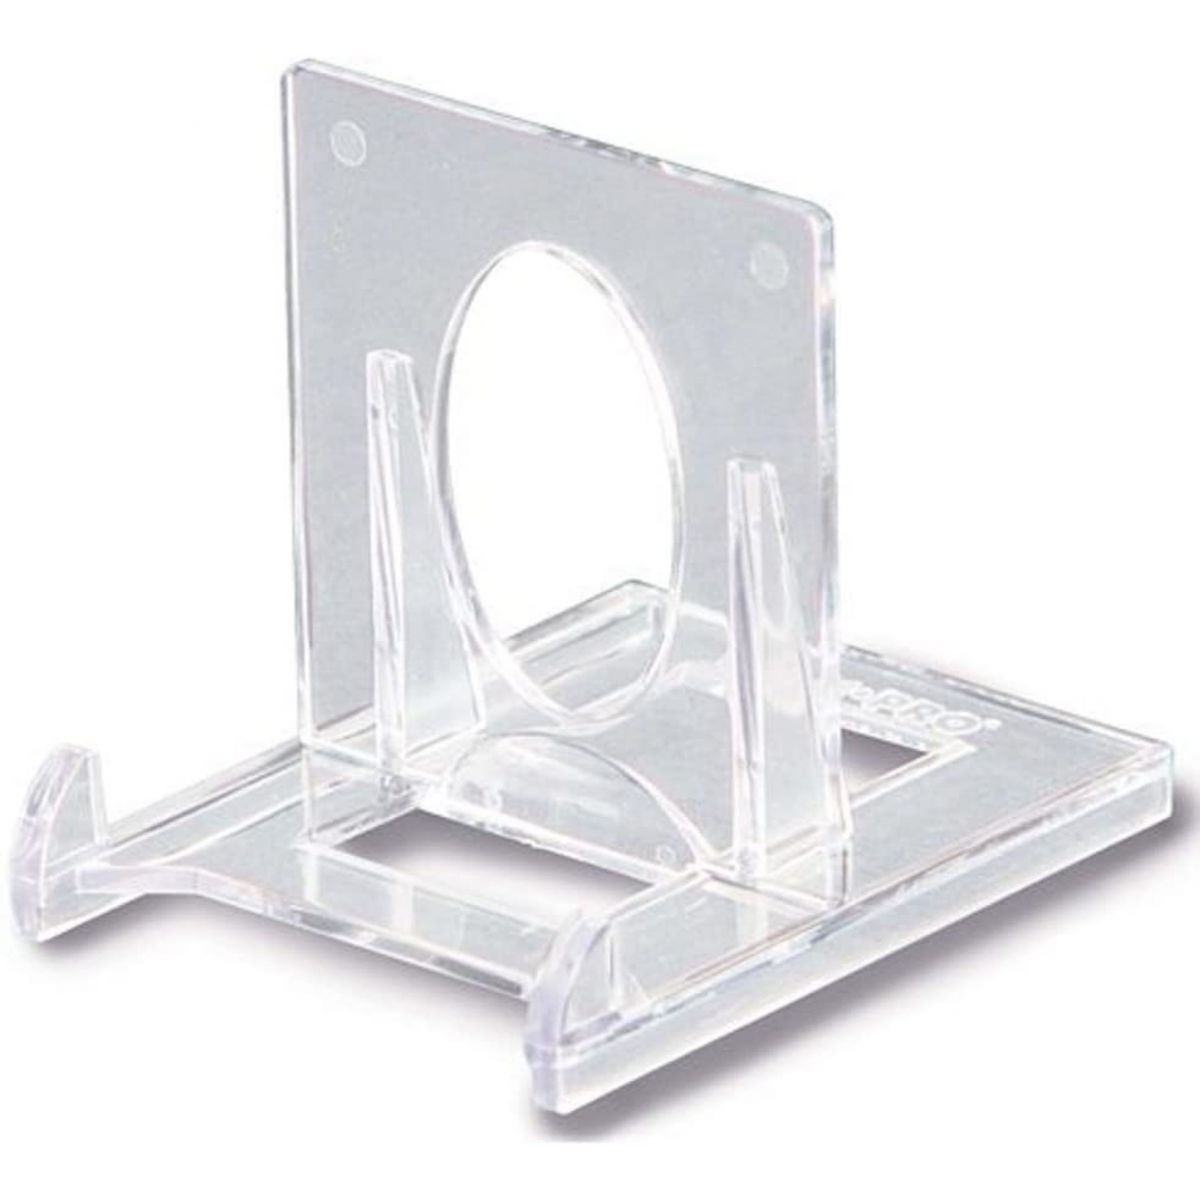 Item Ultra Pro - Stand - Two Piece Clear Holders - Top loader - Screw Frames - Graded Cards (5)